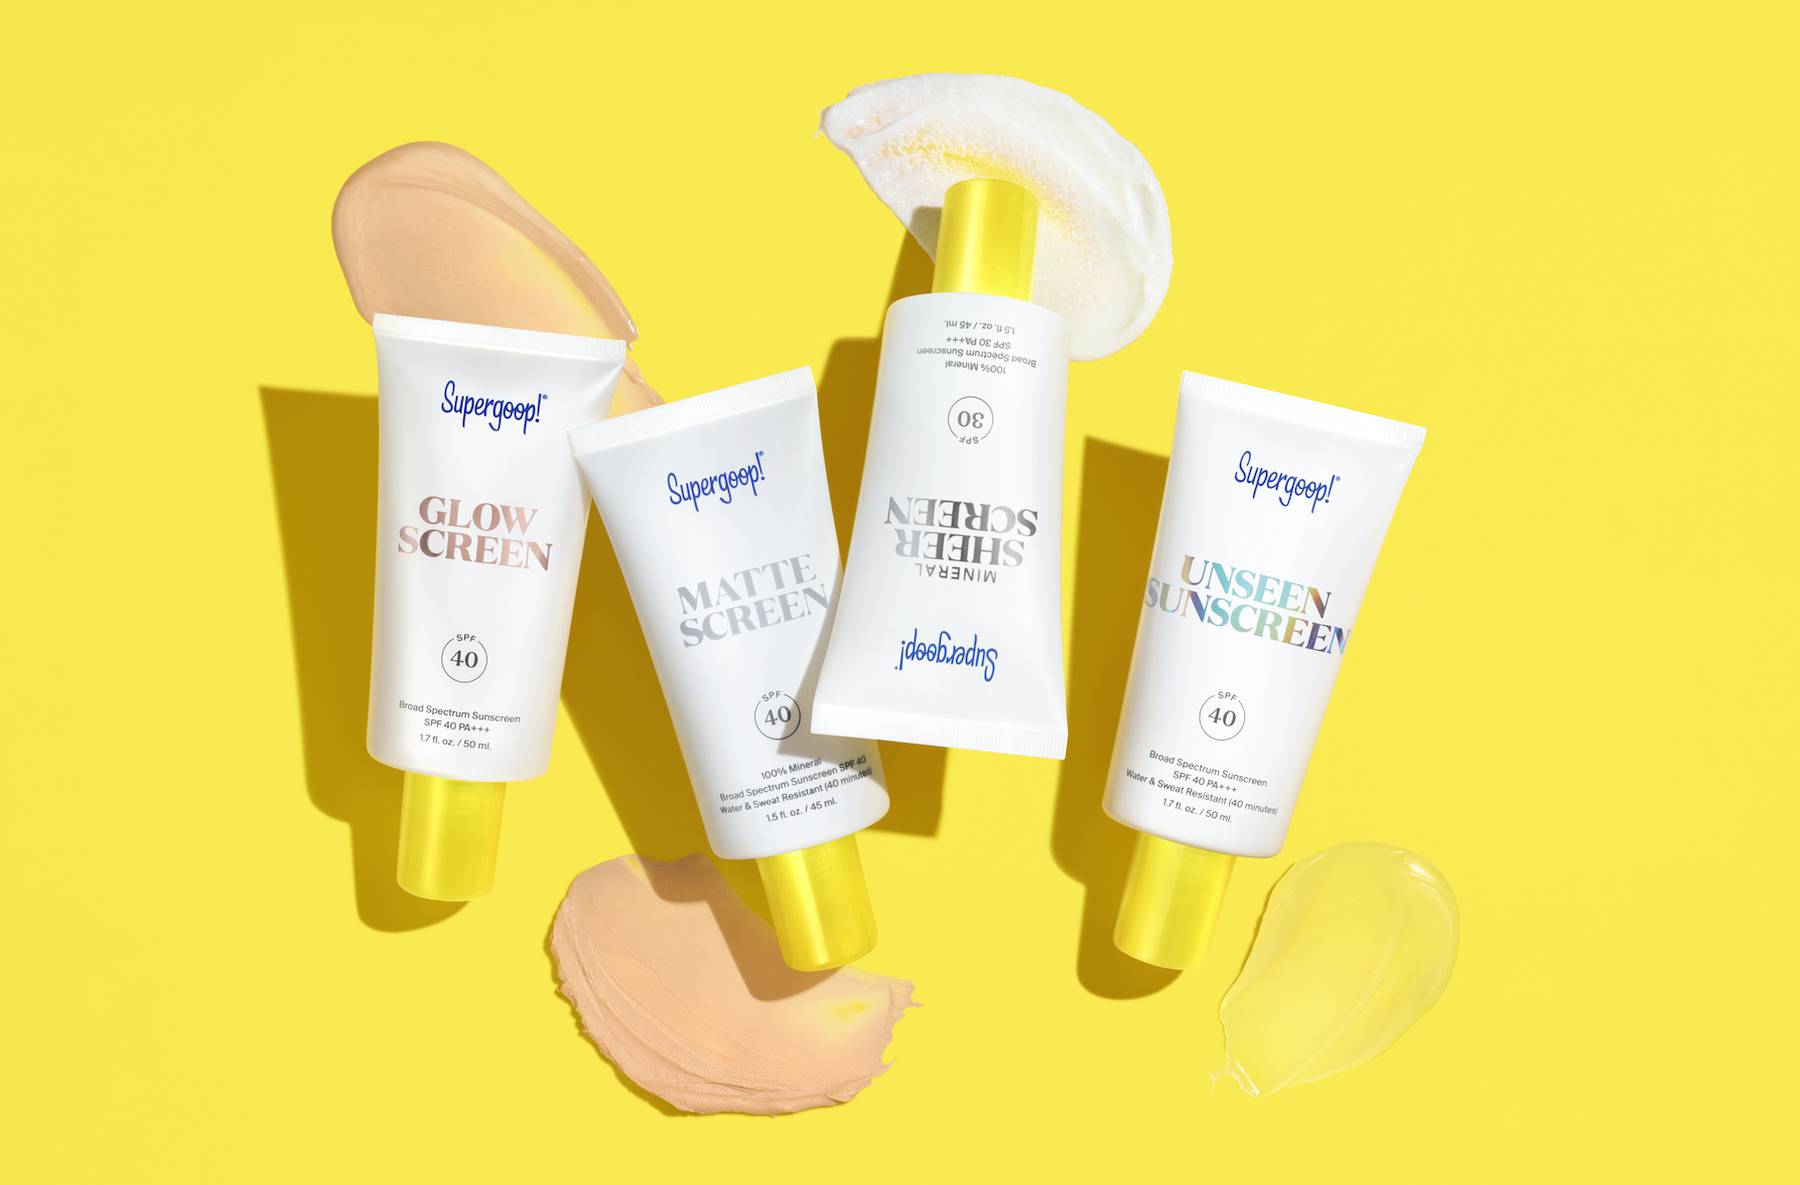 Changing cultural attitudes and product innovation fuelled SPF's perception evolution. Courtesy Supergoop!